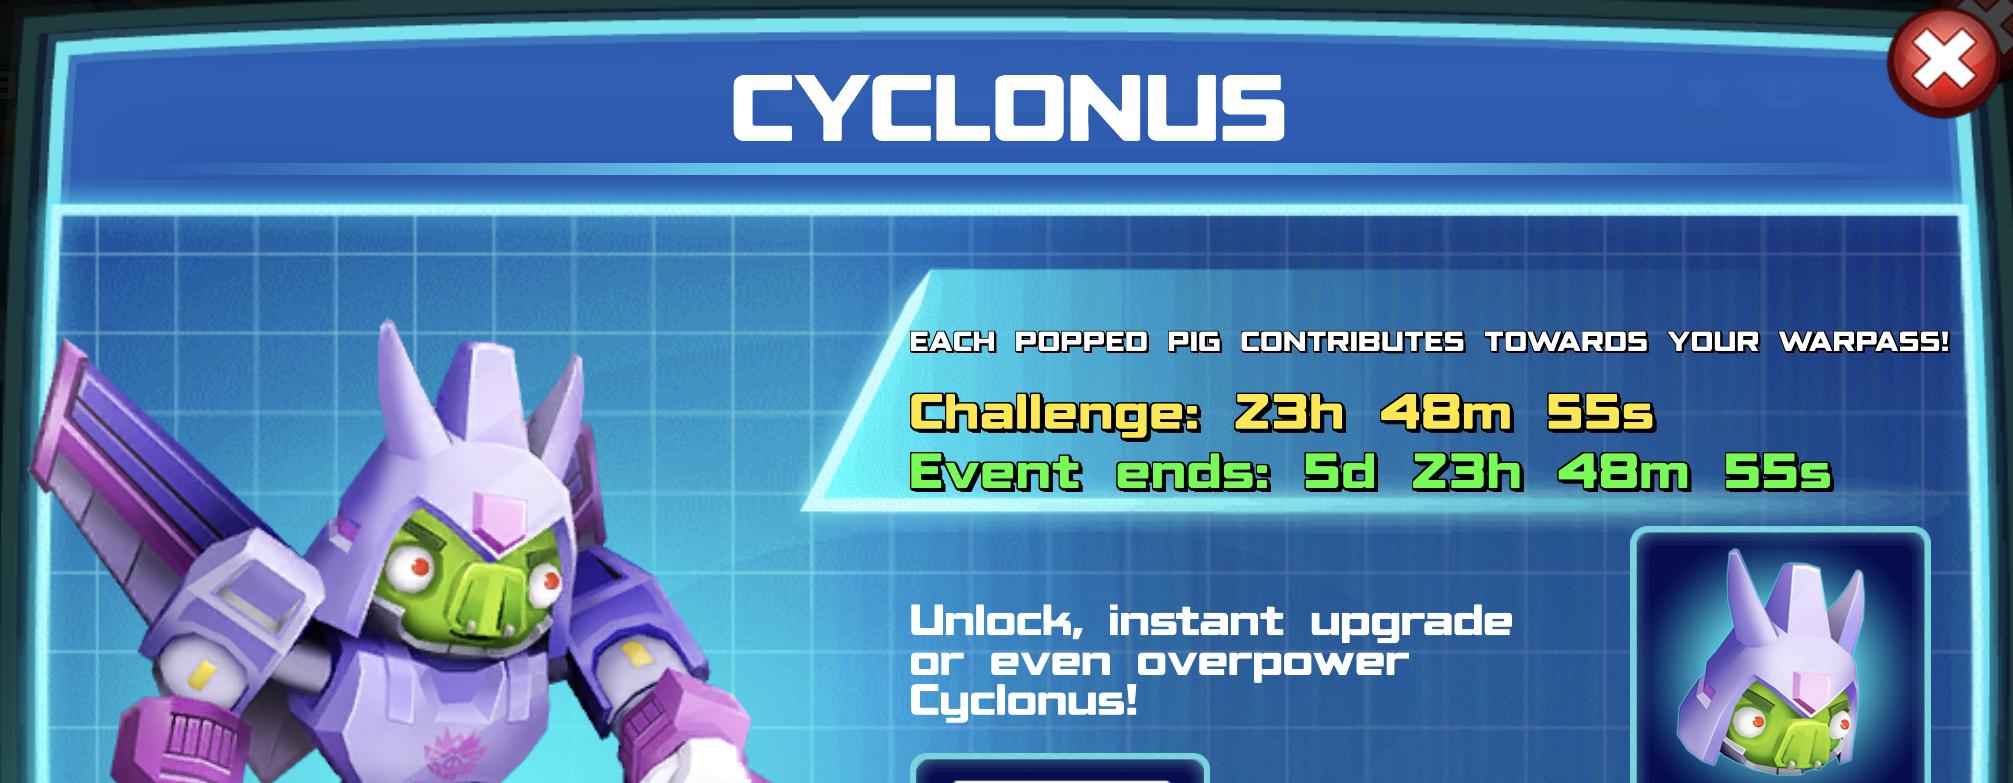 The event banner for Cyclonus